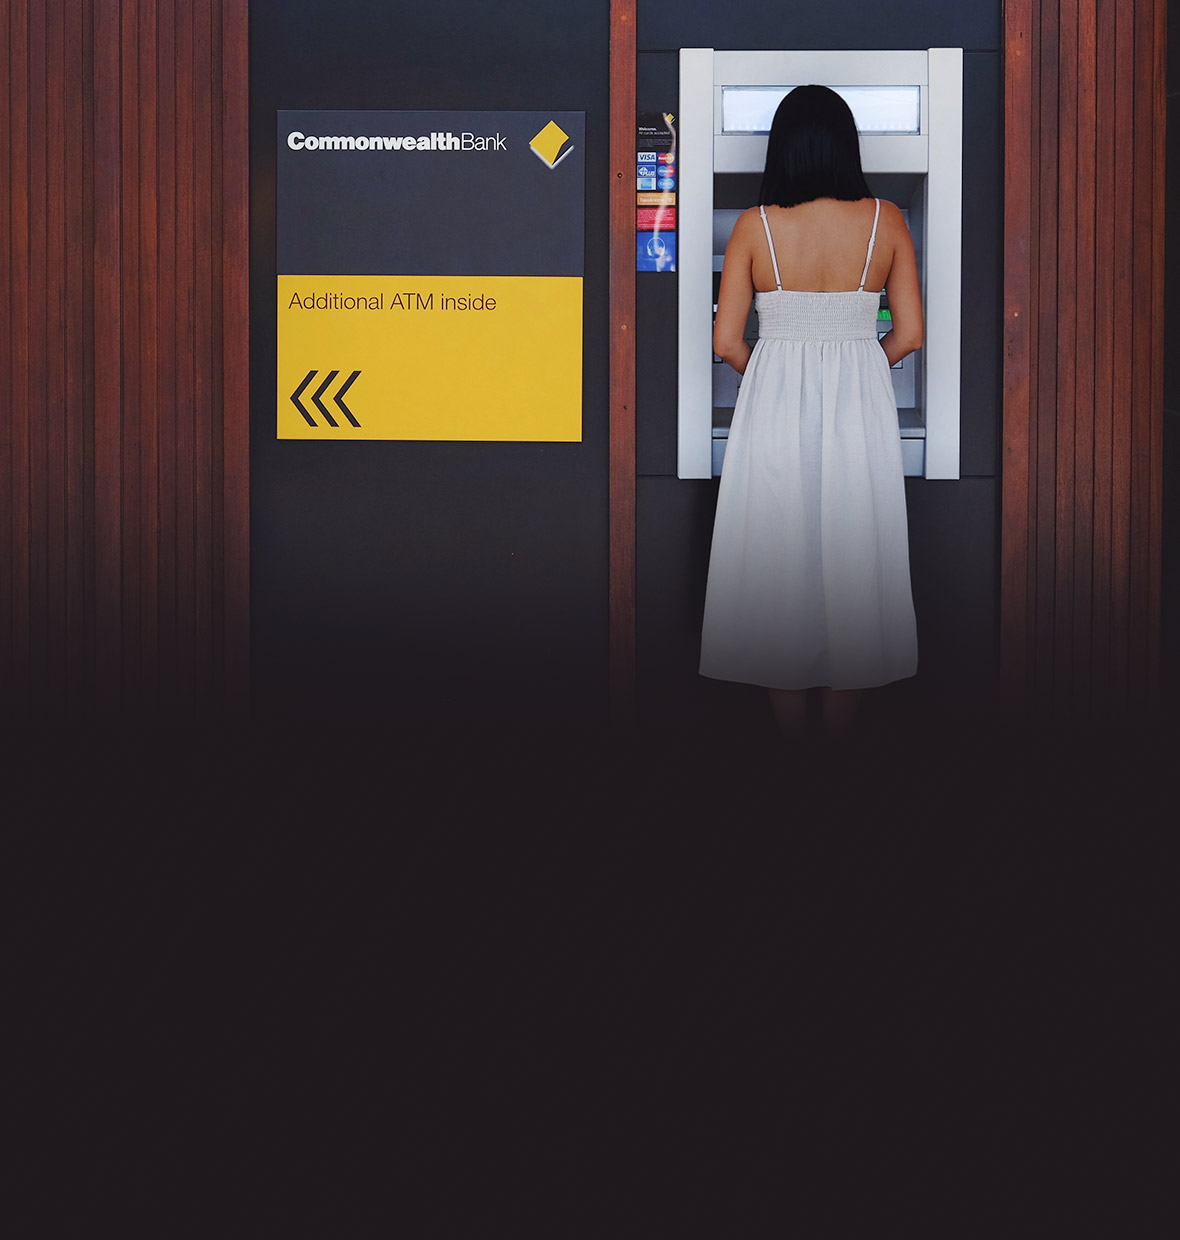 woman at CommBank ATM